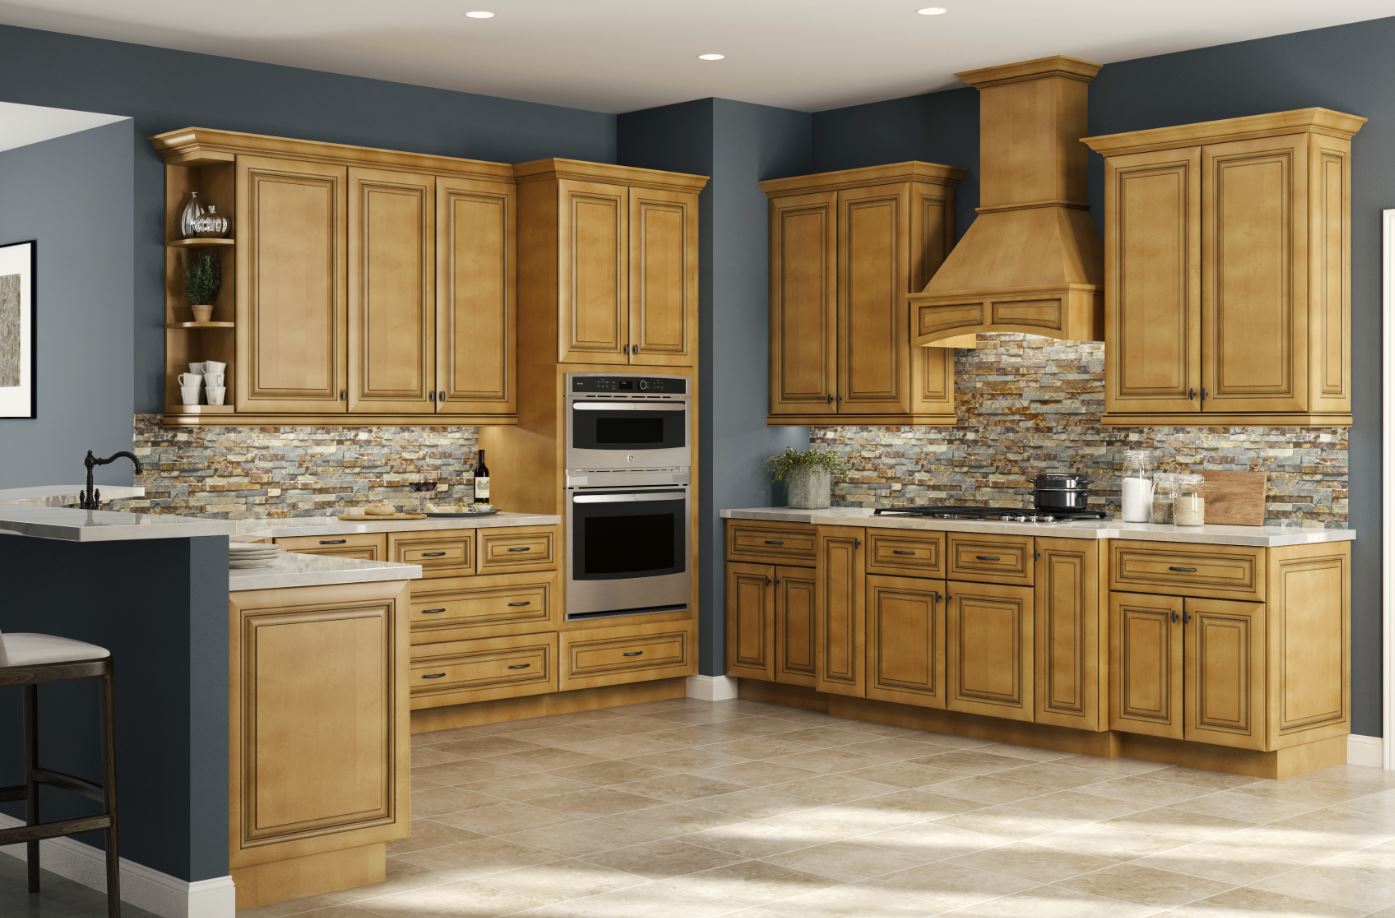 Lewiston Wall Cabinets In Toffee Glaze Kitchen The Home Depot